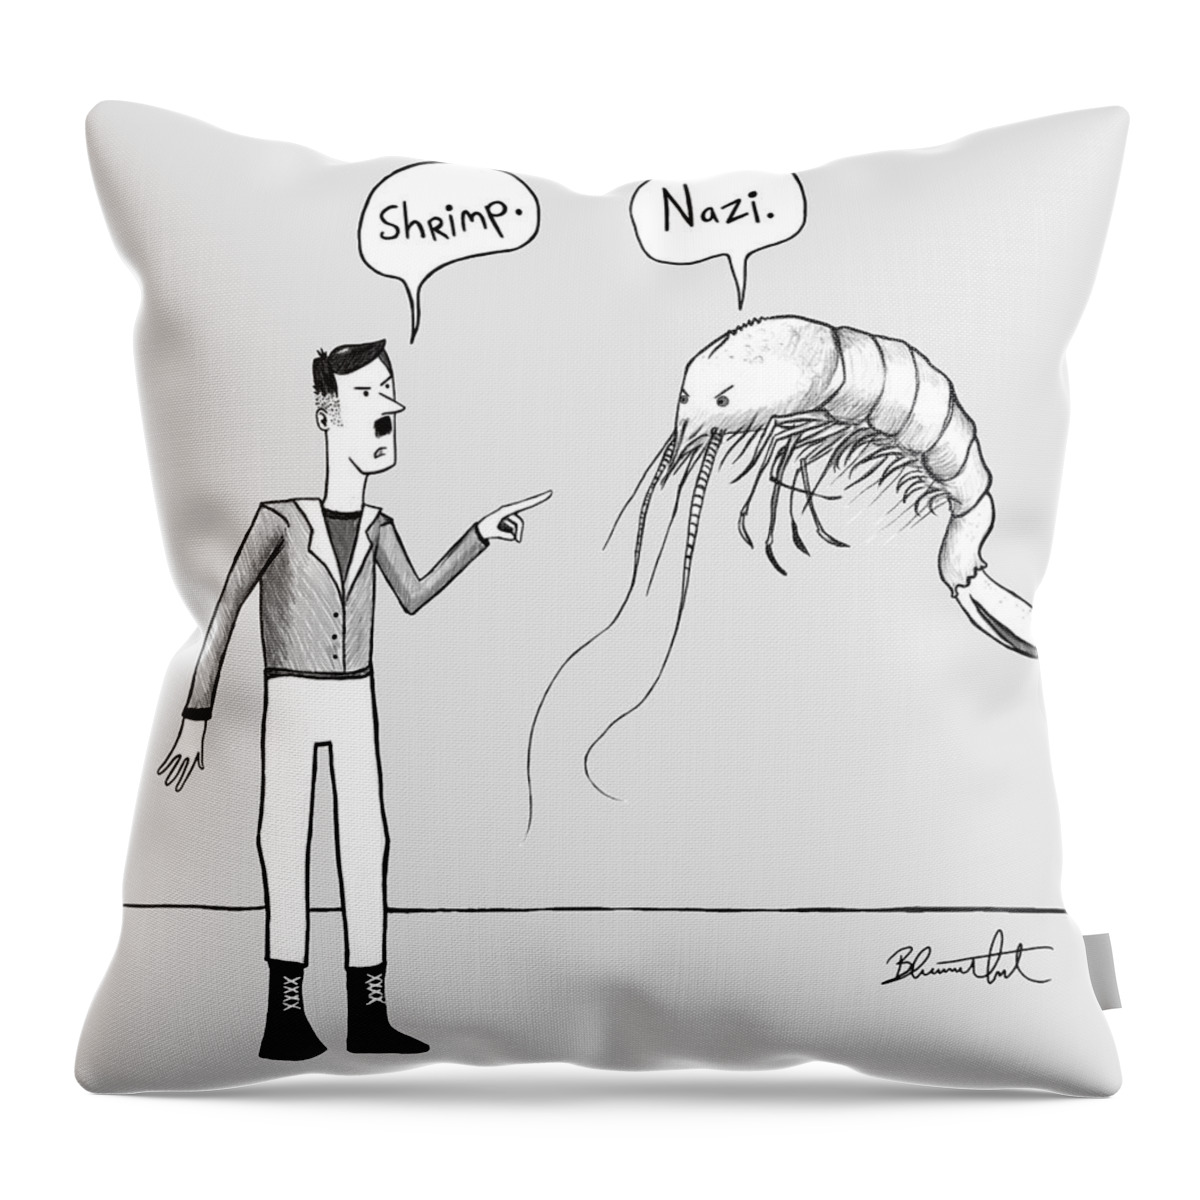 Shrimp Throw Pillow featuring the painting Shrimp by Yom Tov Blumenthal